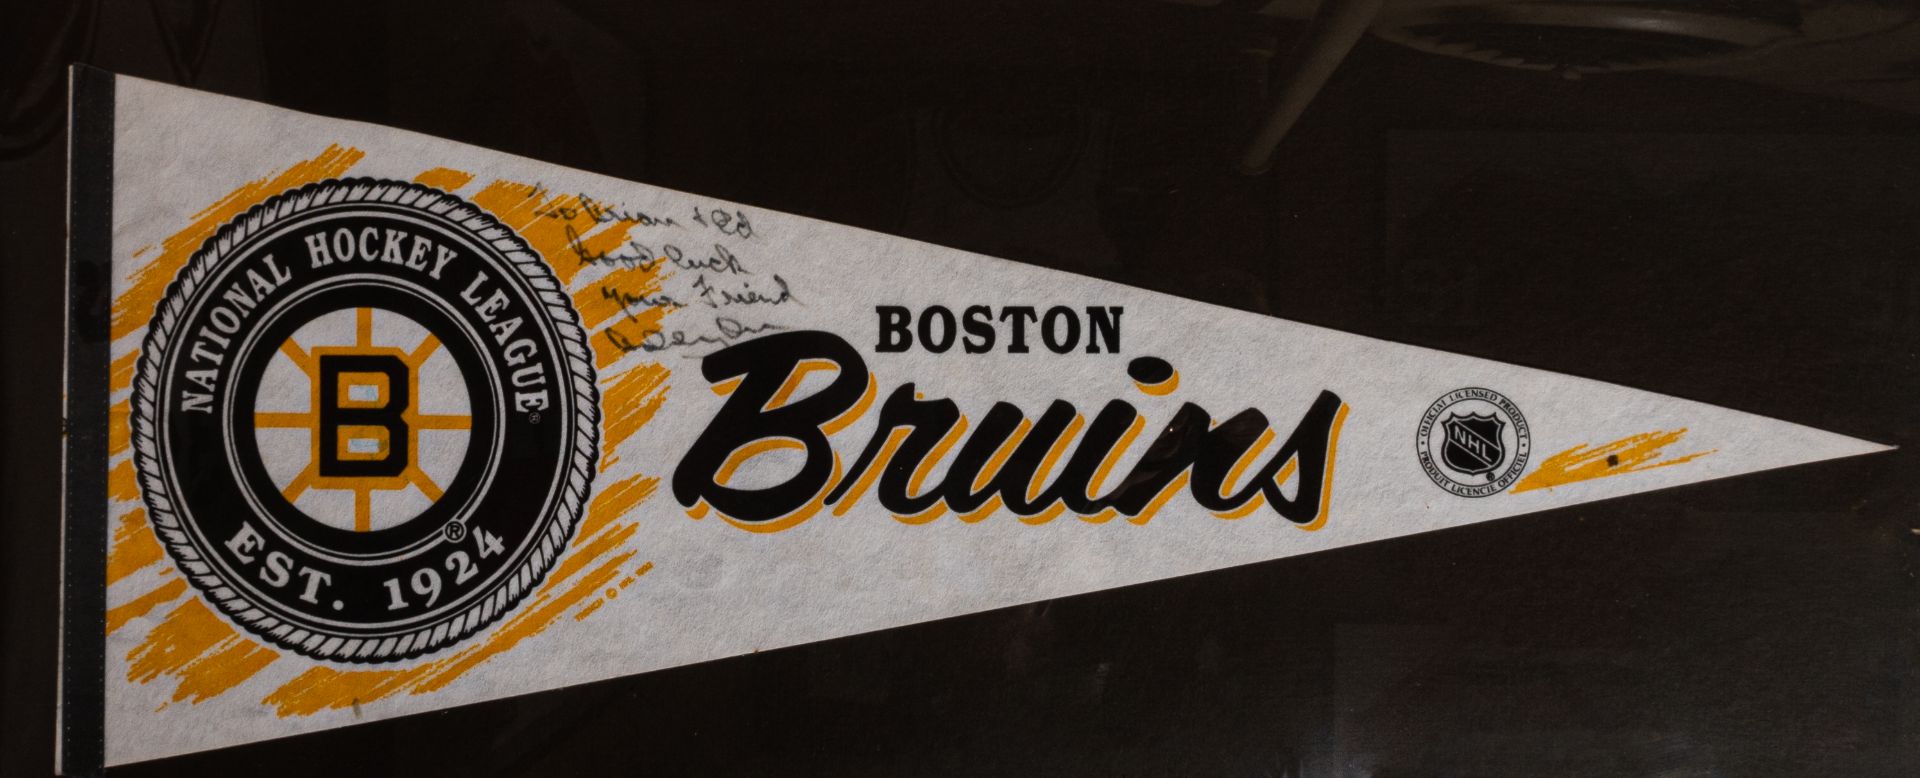 Boston Bruins Pennant Signed "To Brian and Ed, Goodluck, Your friend Bobby Orr", Framed 35"x18"